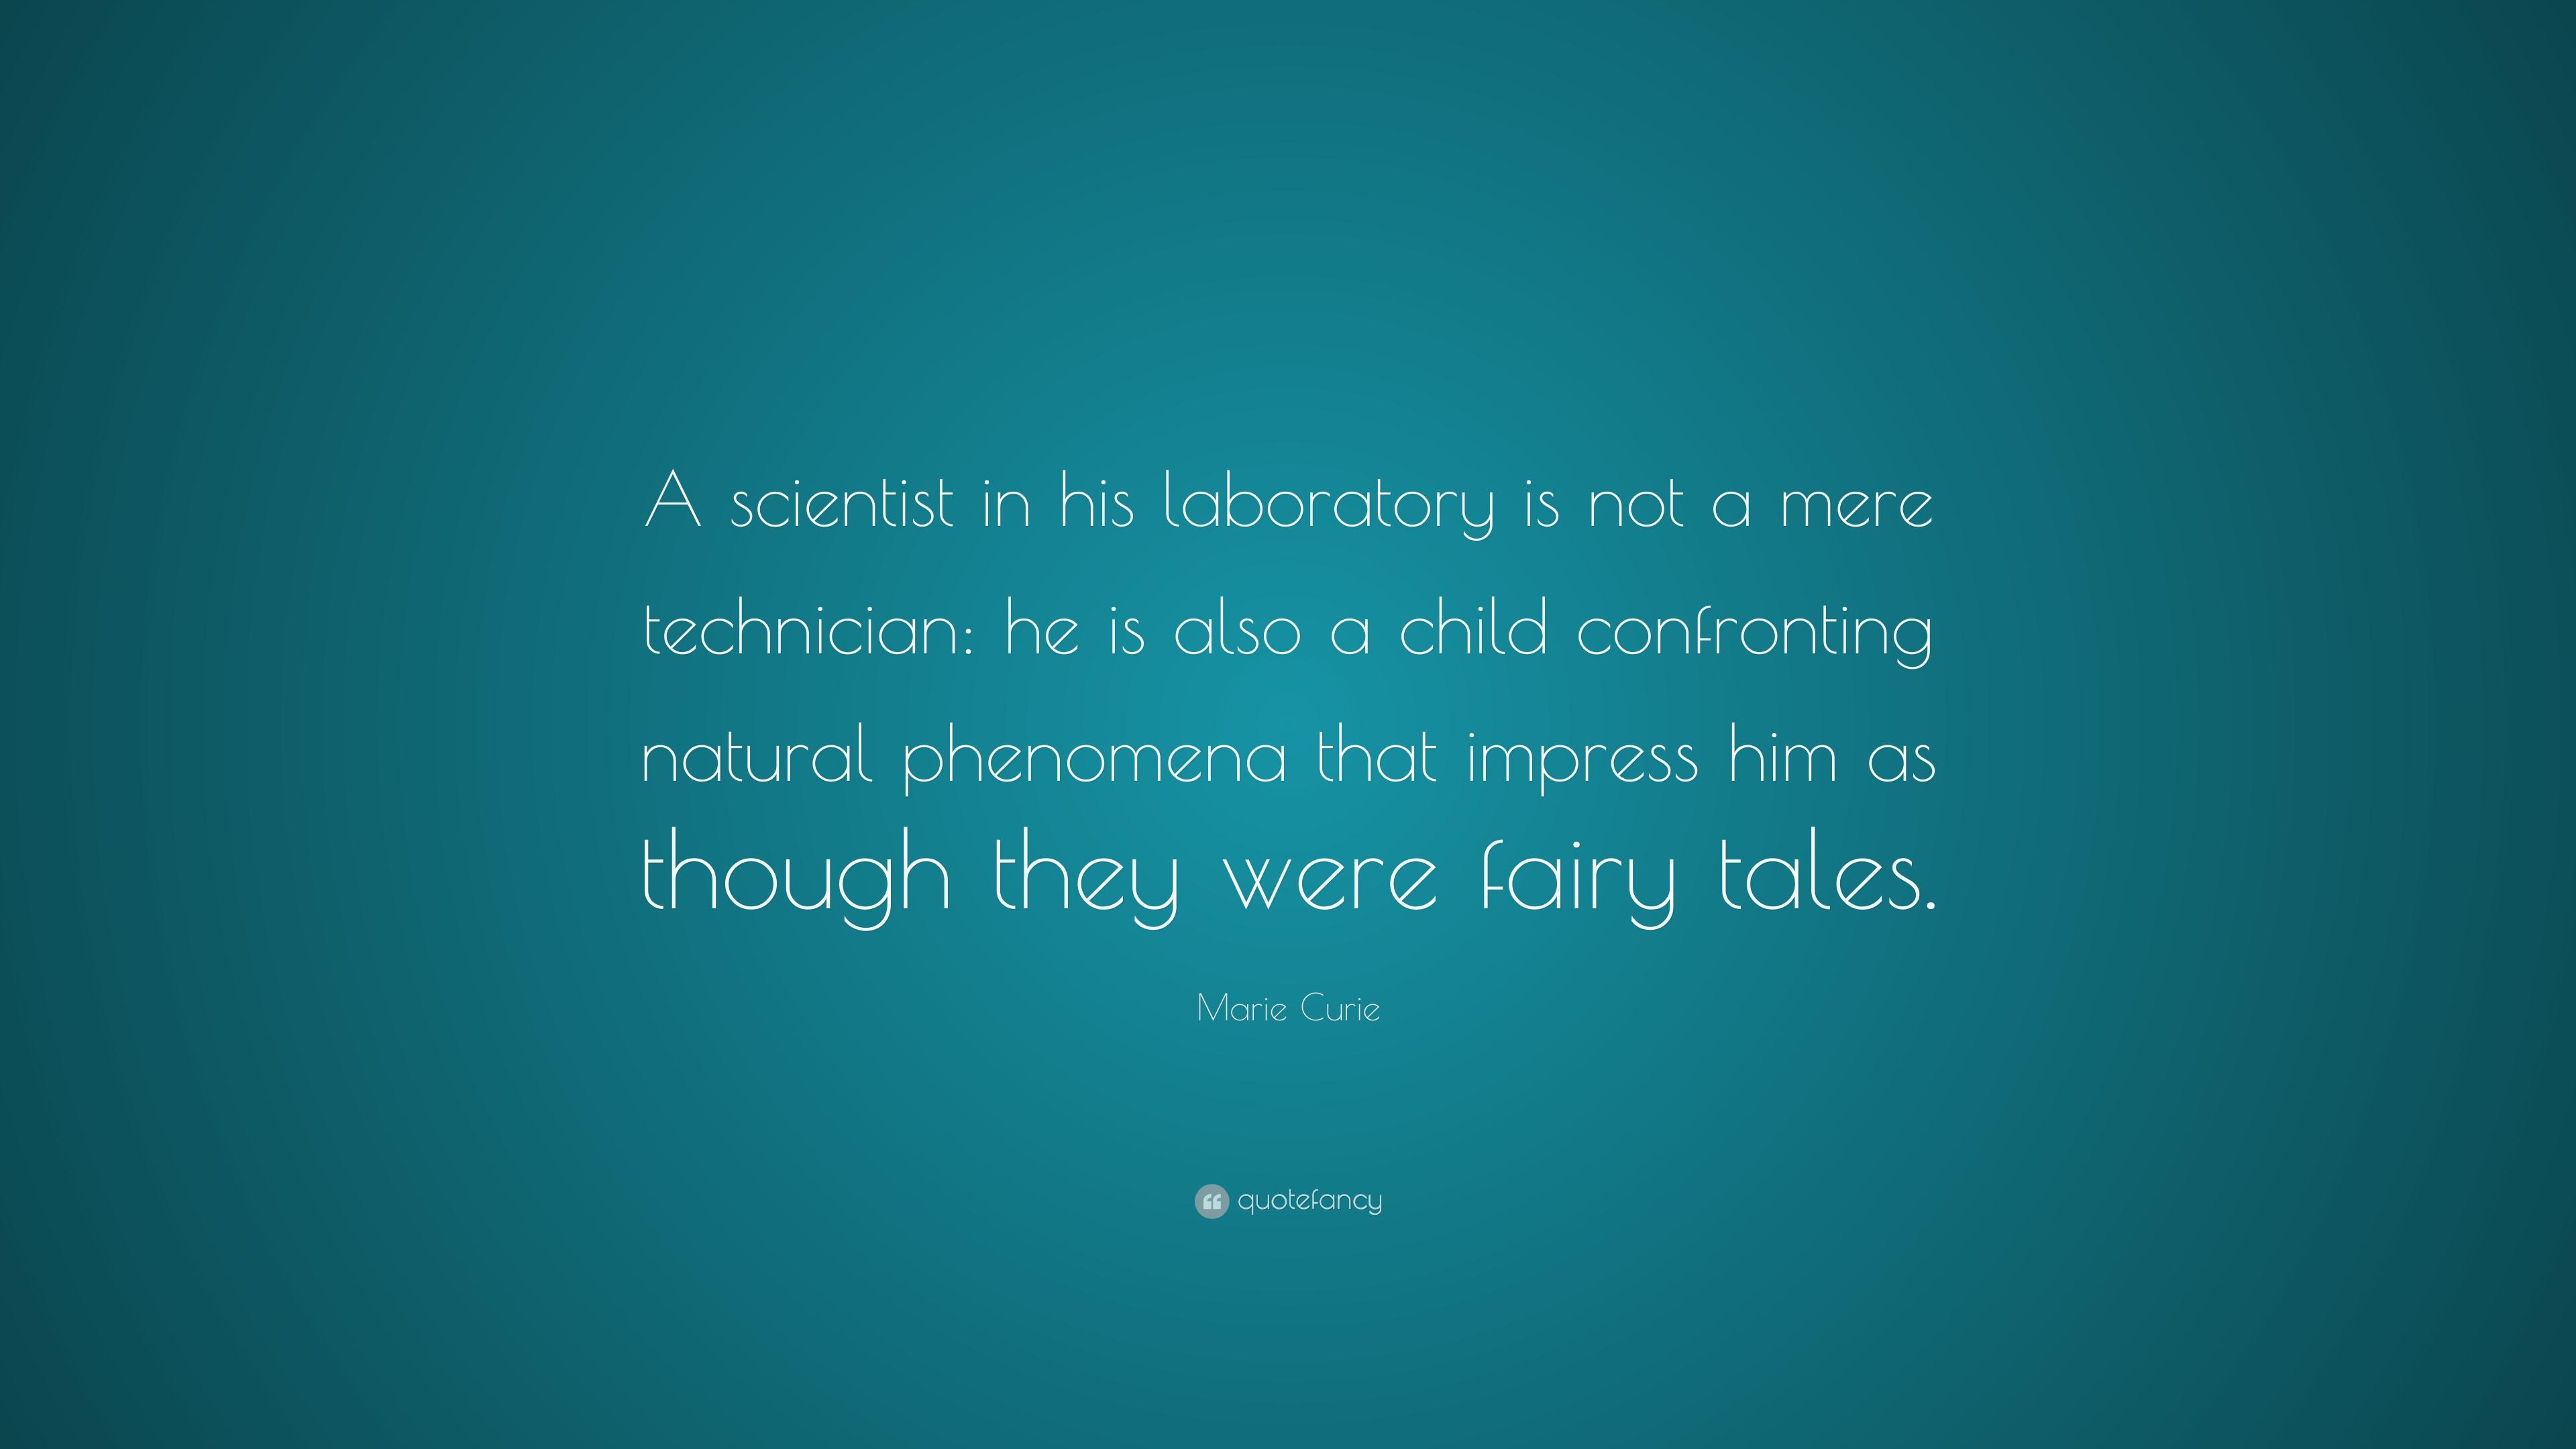 Marie Curie Quote: “A scientist in his laboratory is not a